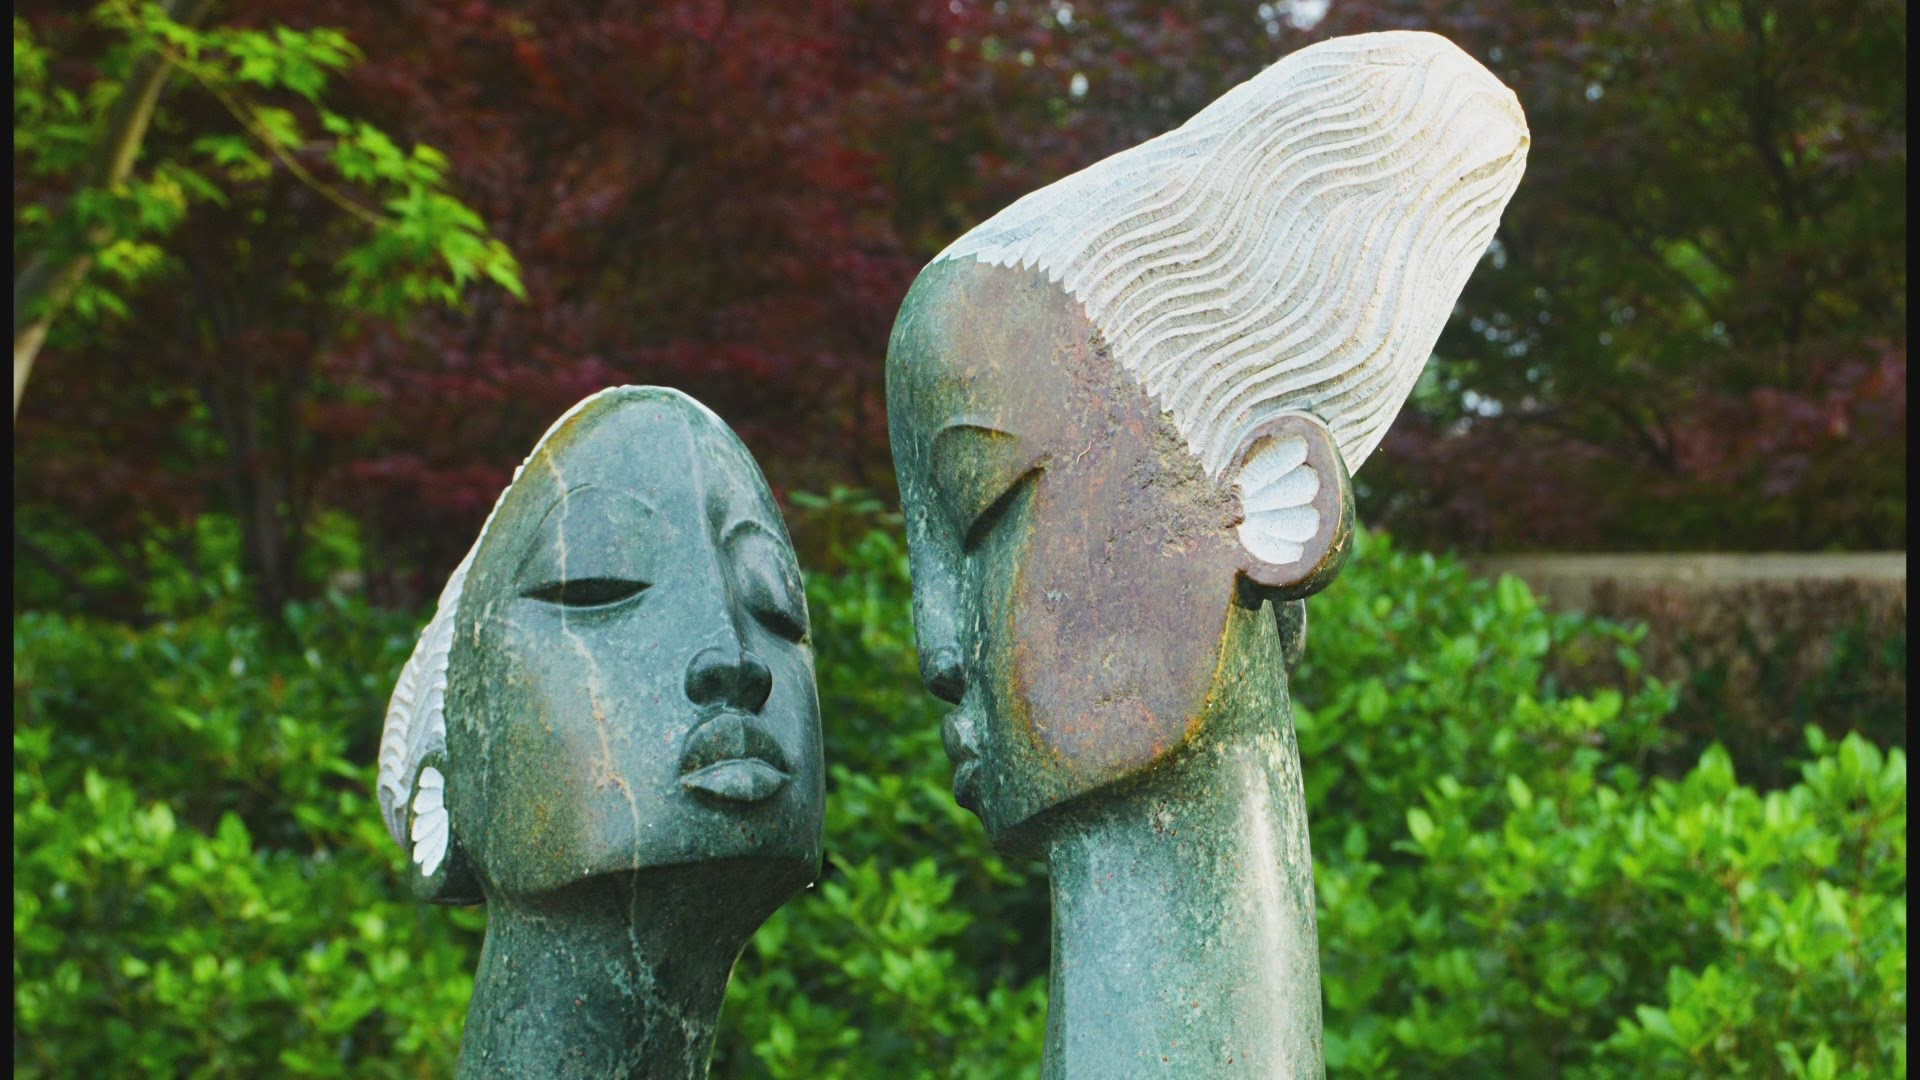 A stone sculpture exhibit is just one of the things to see and do at the Dallas Arboretum this spring.